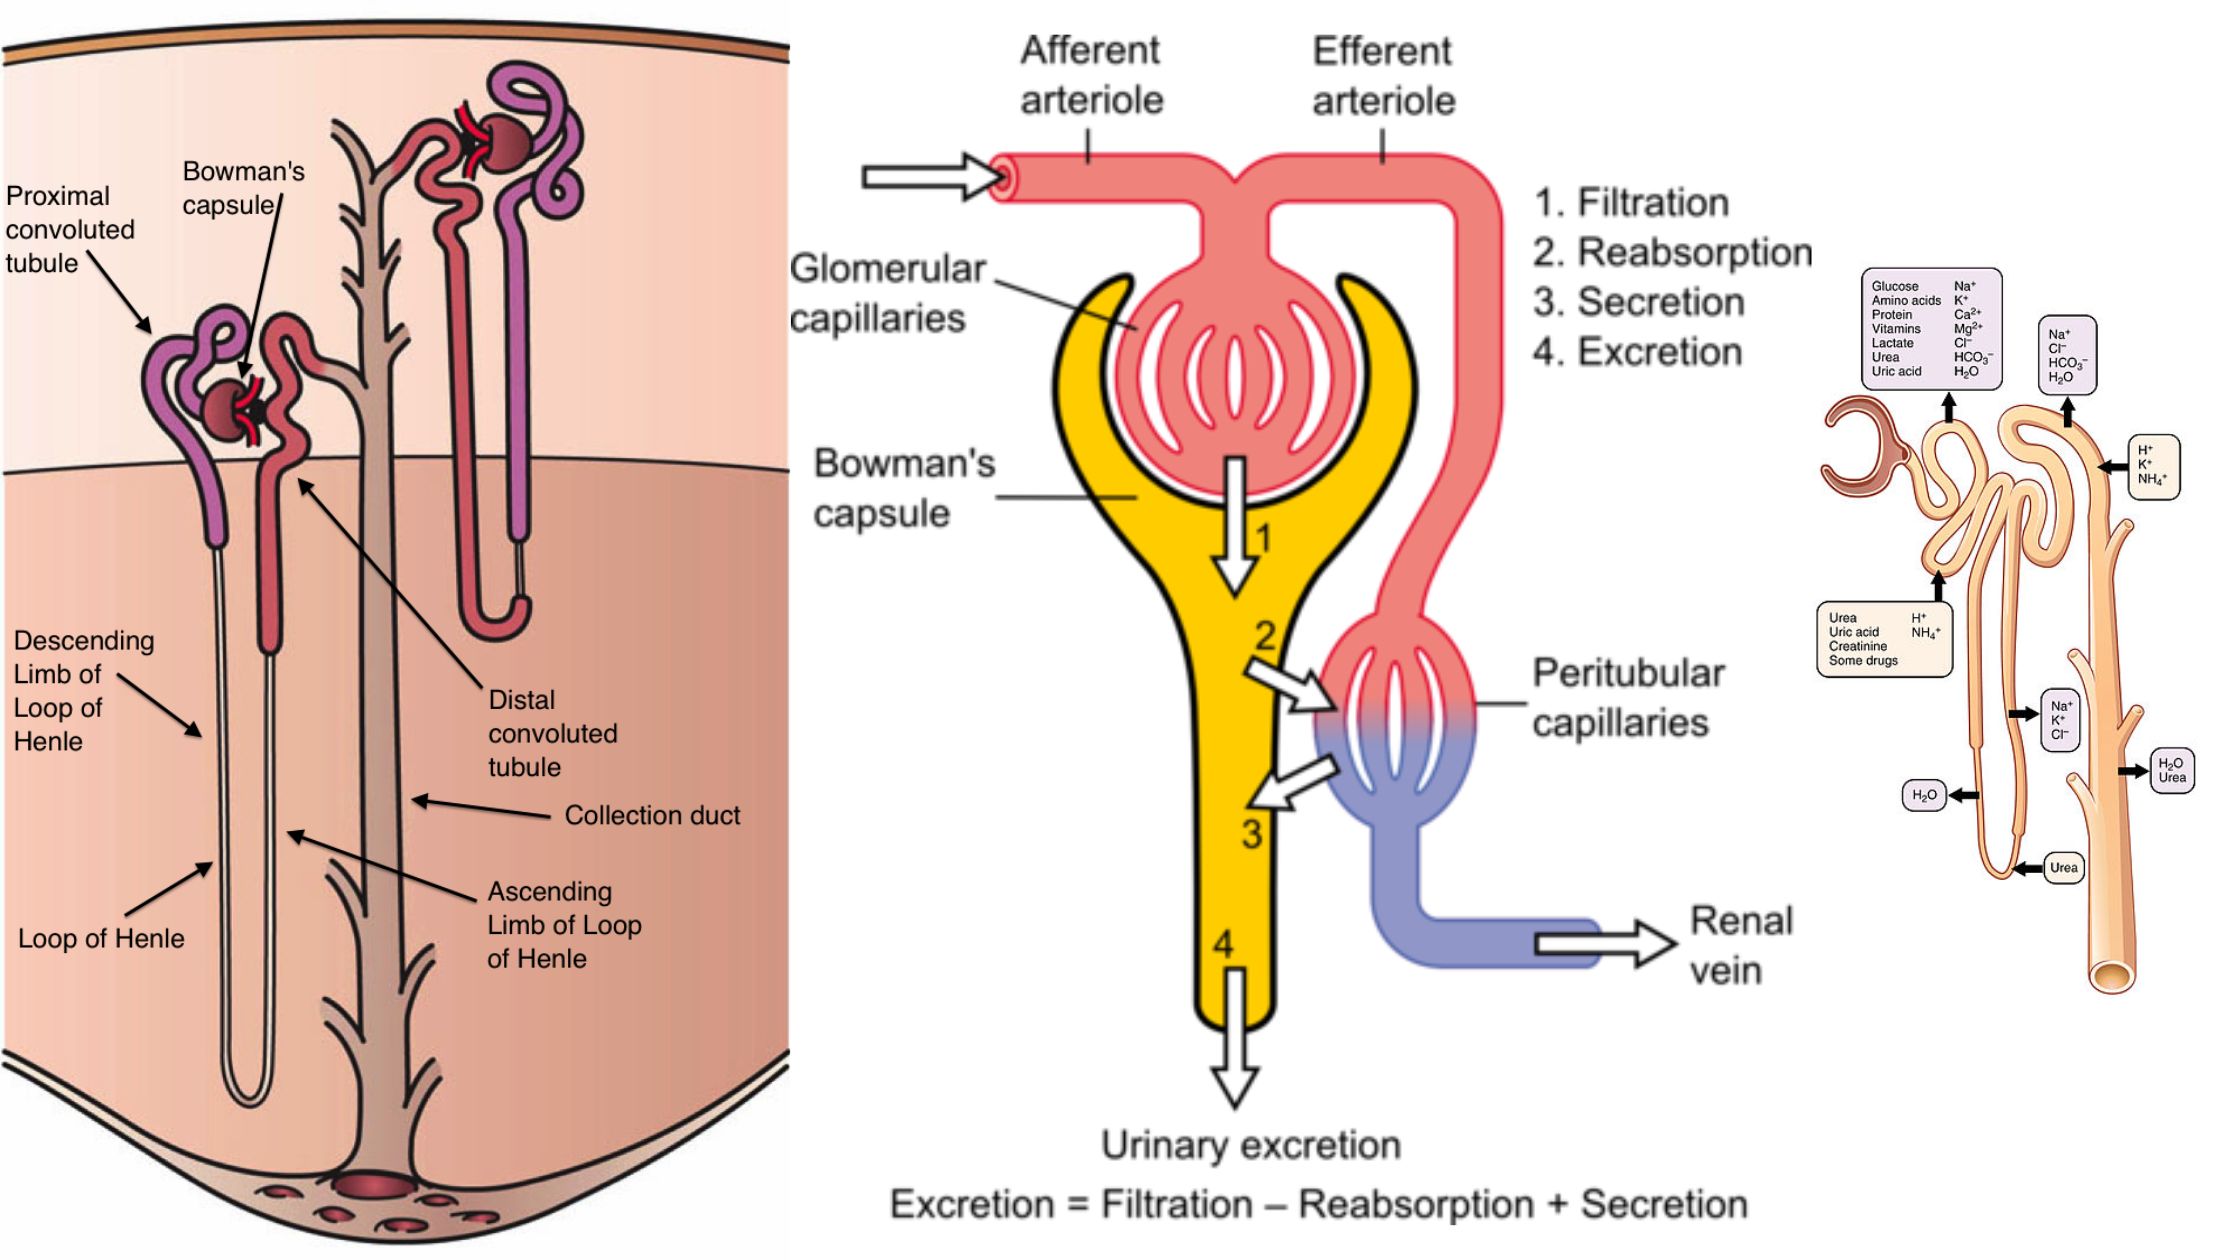 Nephron - Definition, Structure, Physiology, Functions